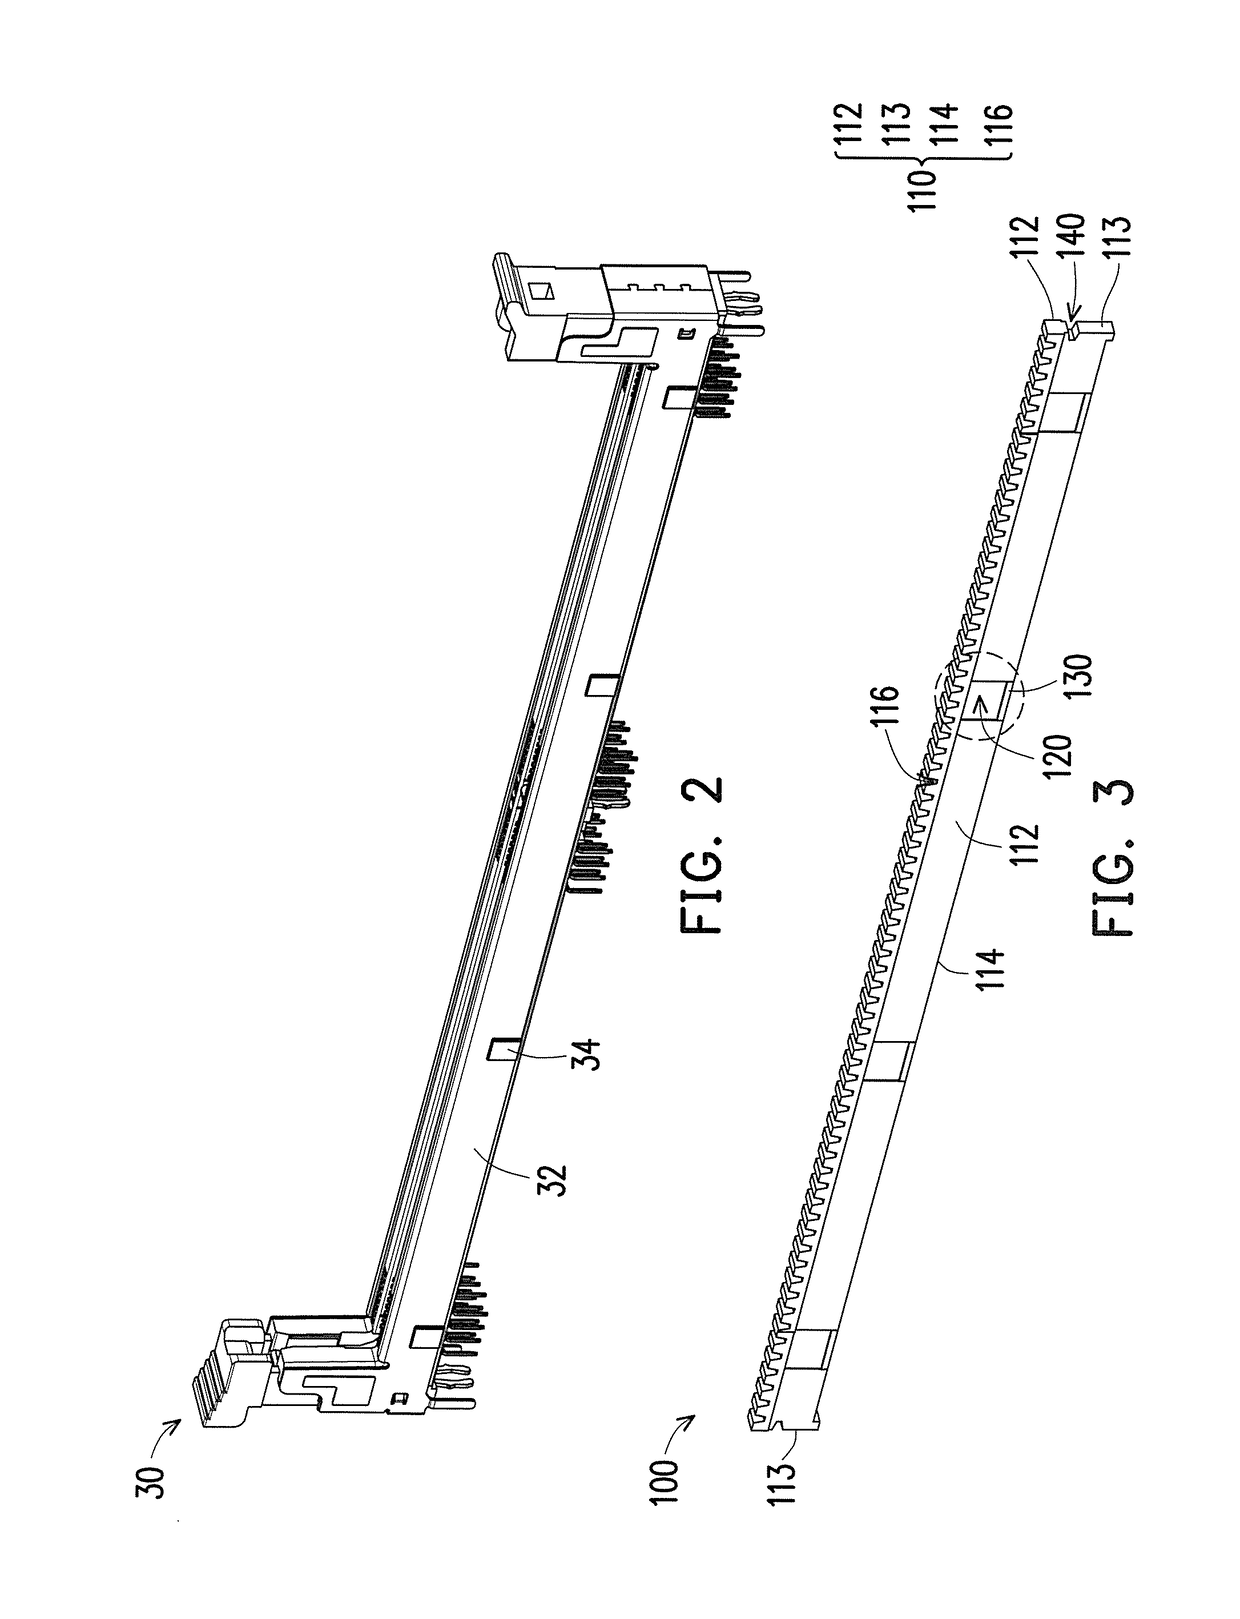 Light guide bar and connector assembly